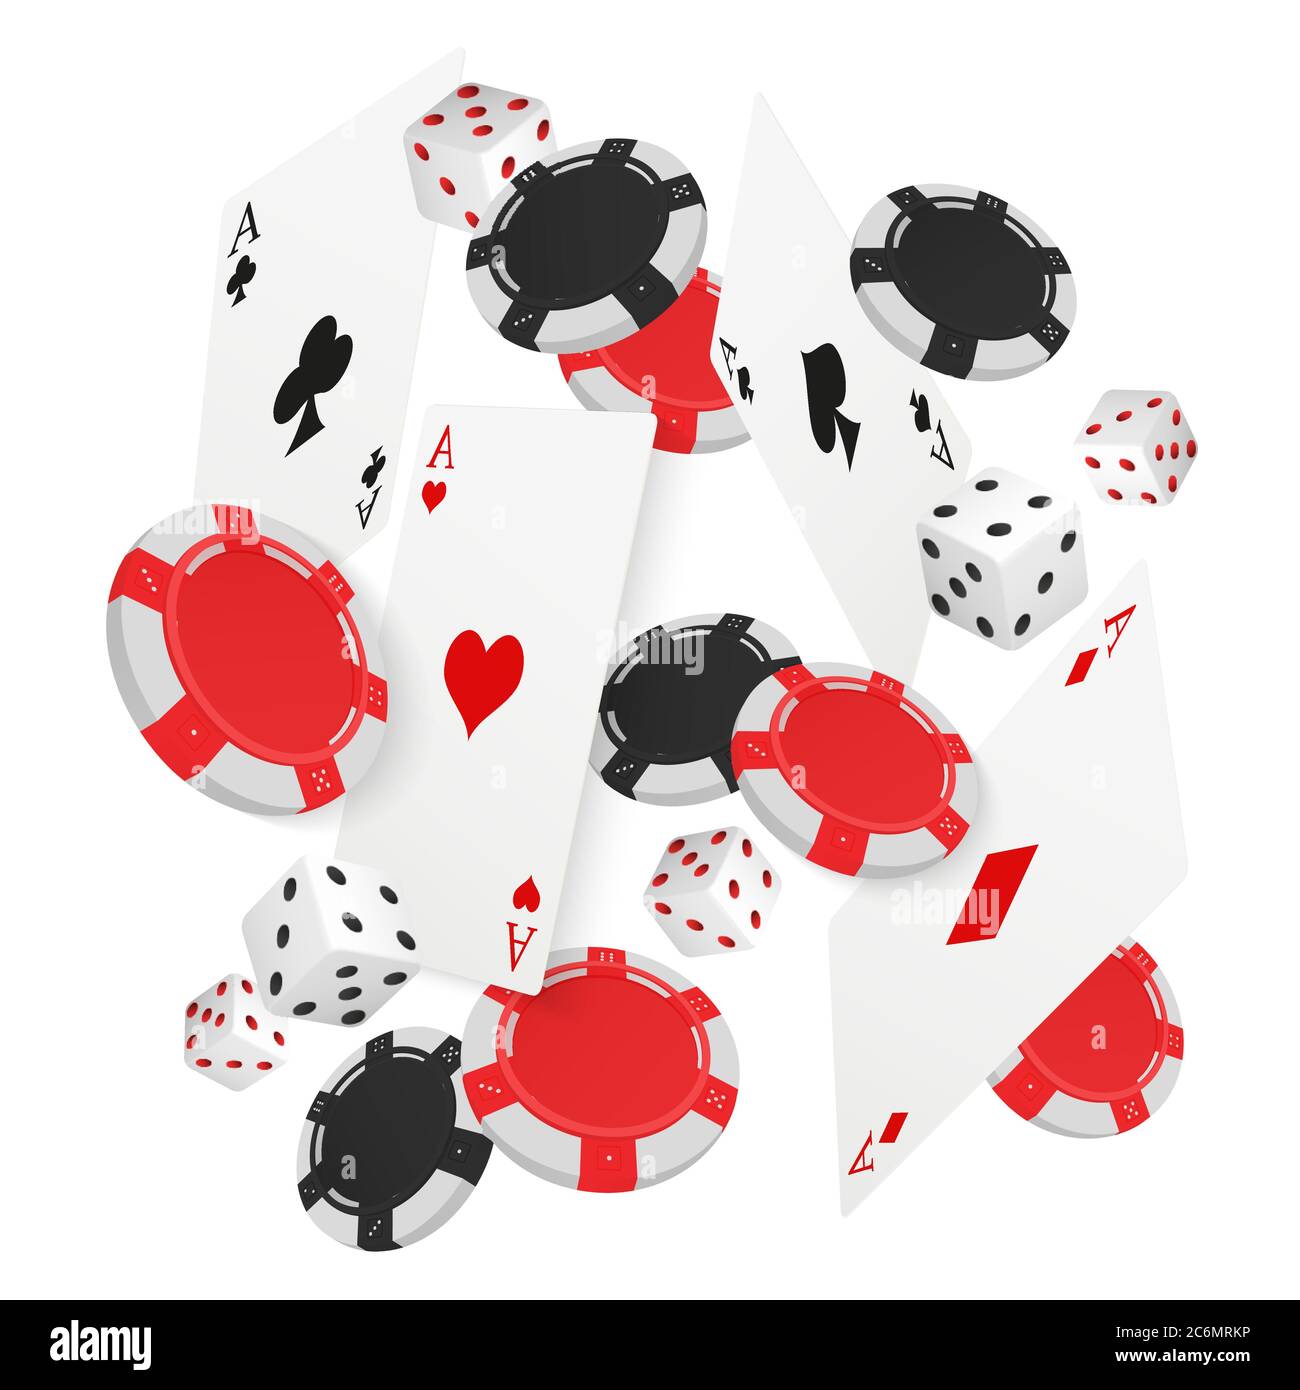 Casino Concept Floating Cards and Chips. Casino poker design template. Falling poker cards and chips game ucky background Stock Vector